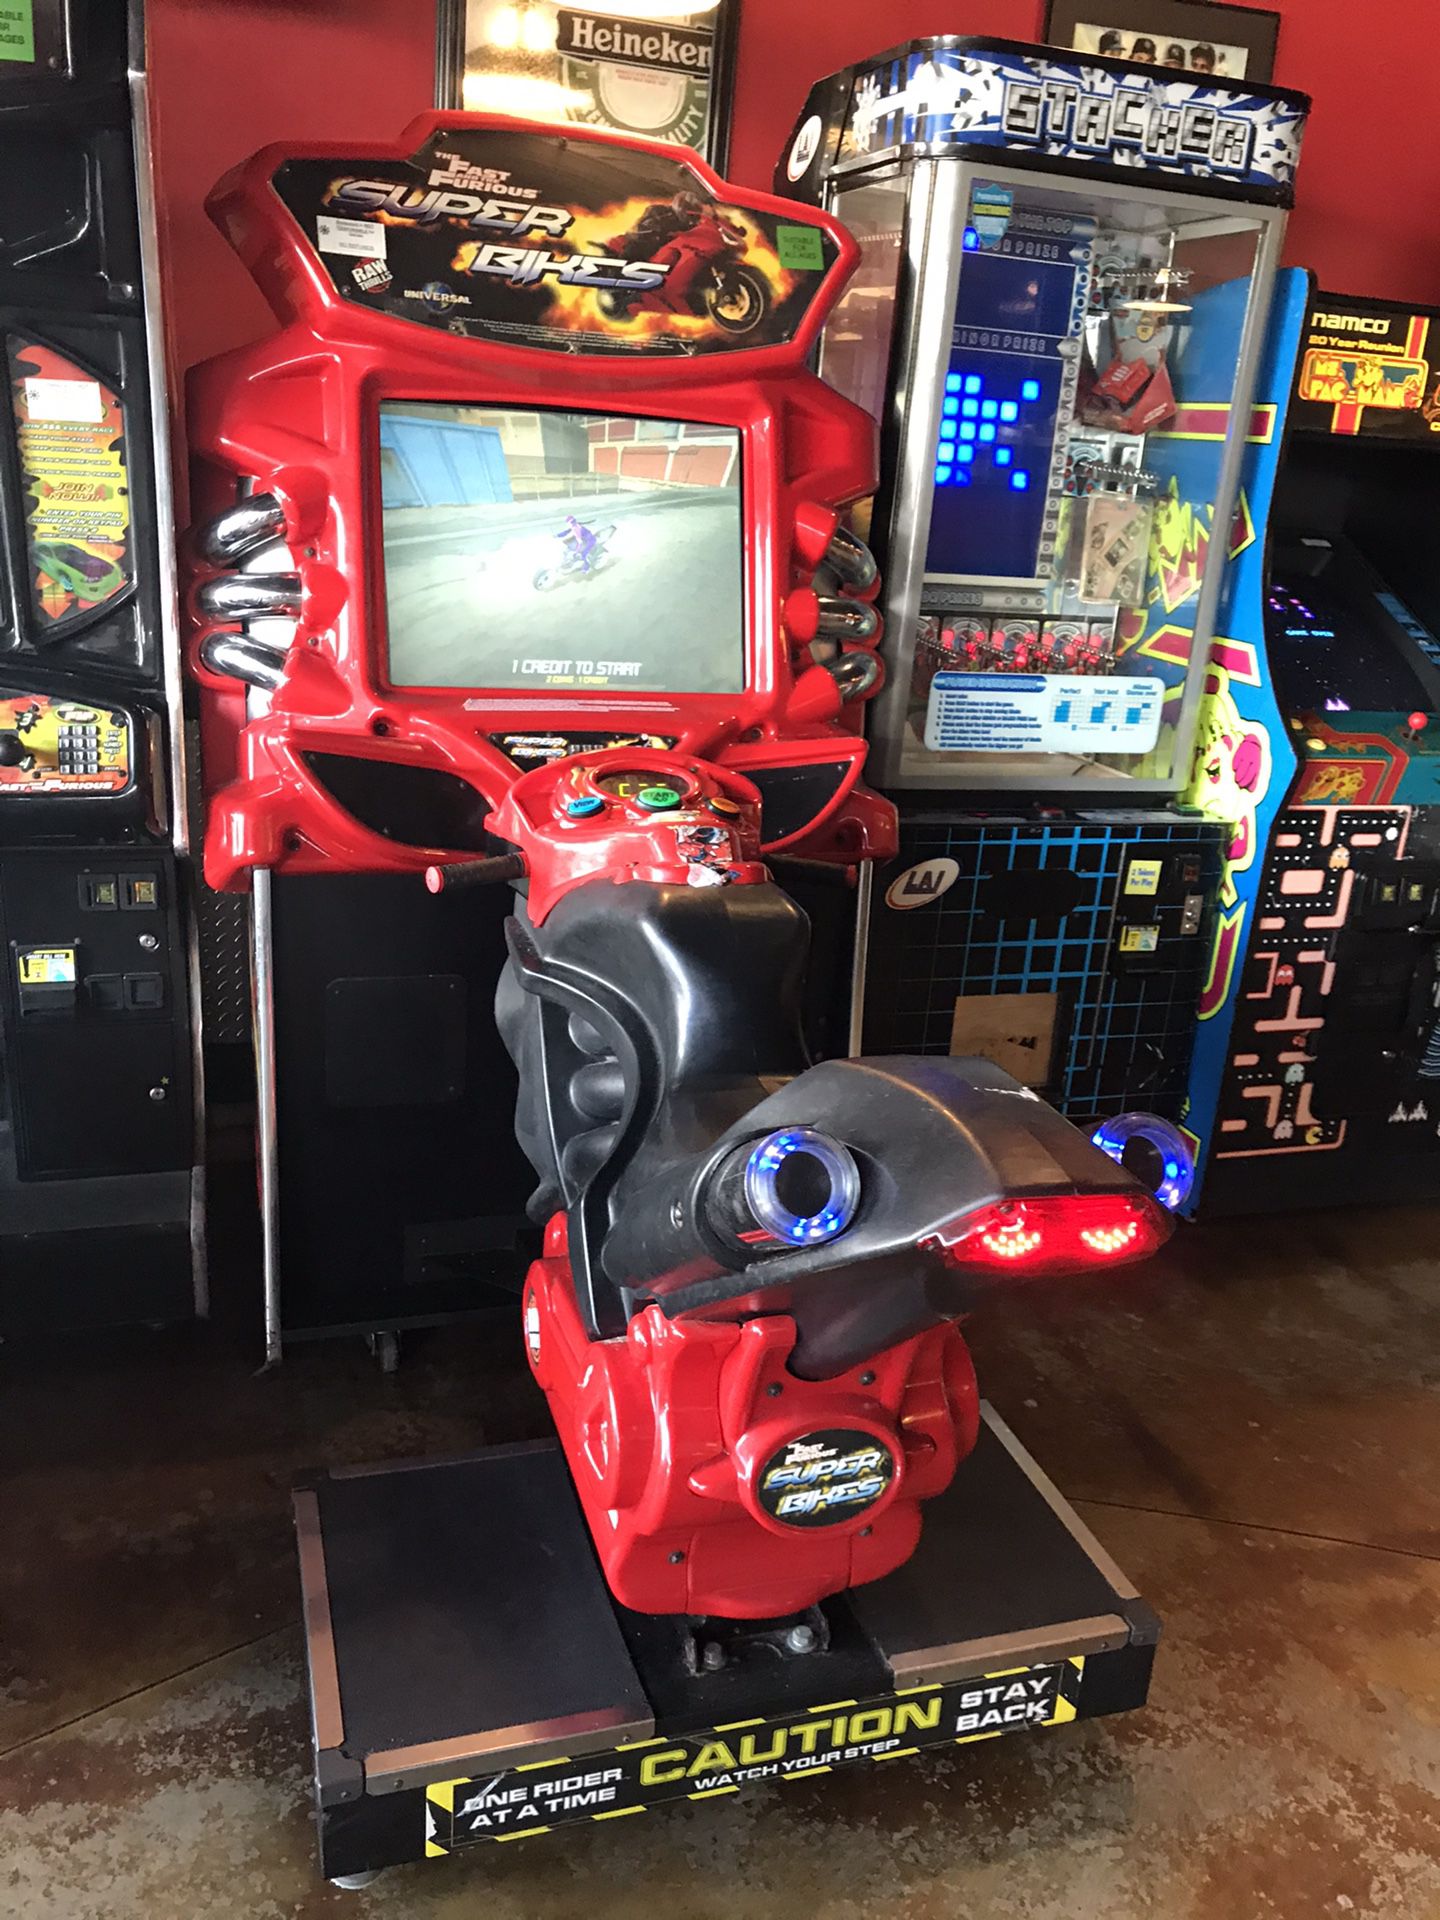 The Fast and the Furious SUPER BIKES Motorcycle Arcade Driving Video Game